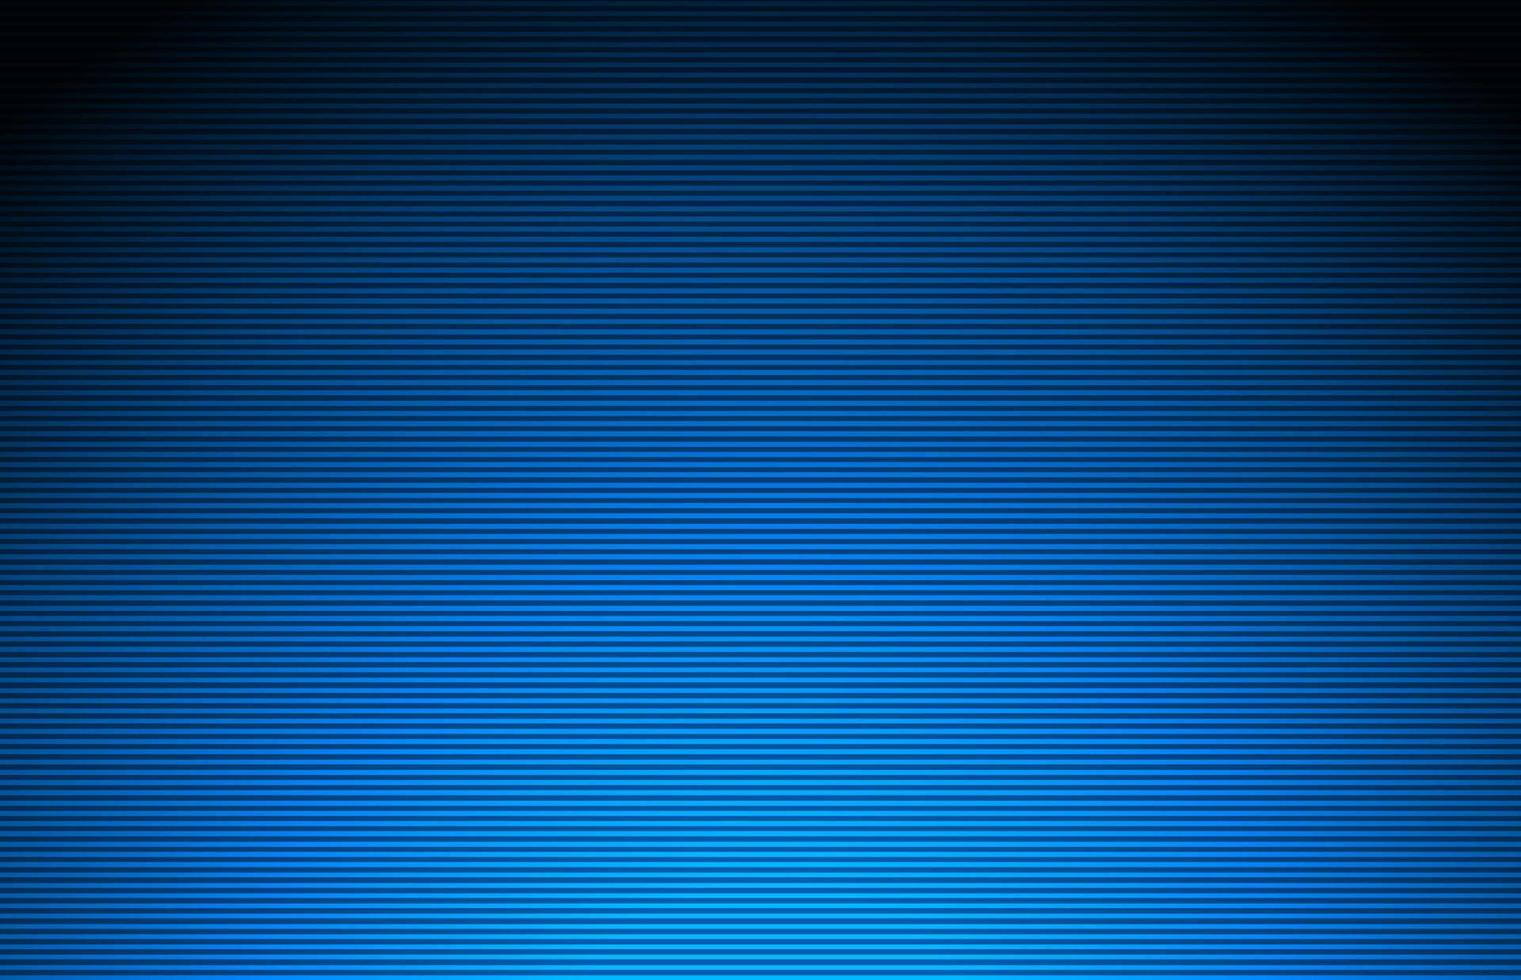 Abstract Linear Gradient Background  for graphic design. Vector illustration